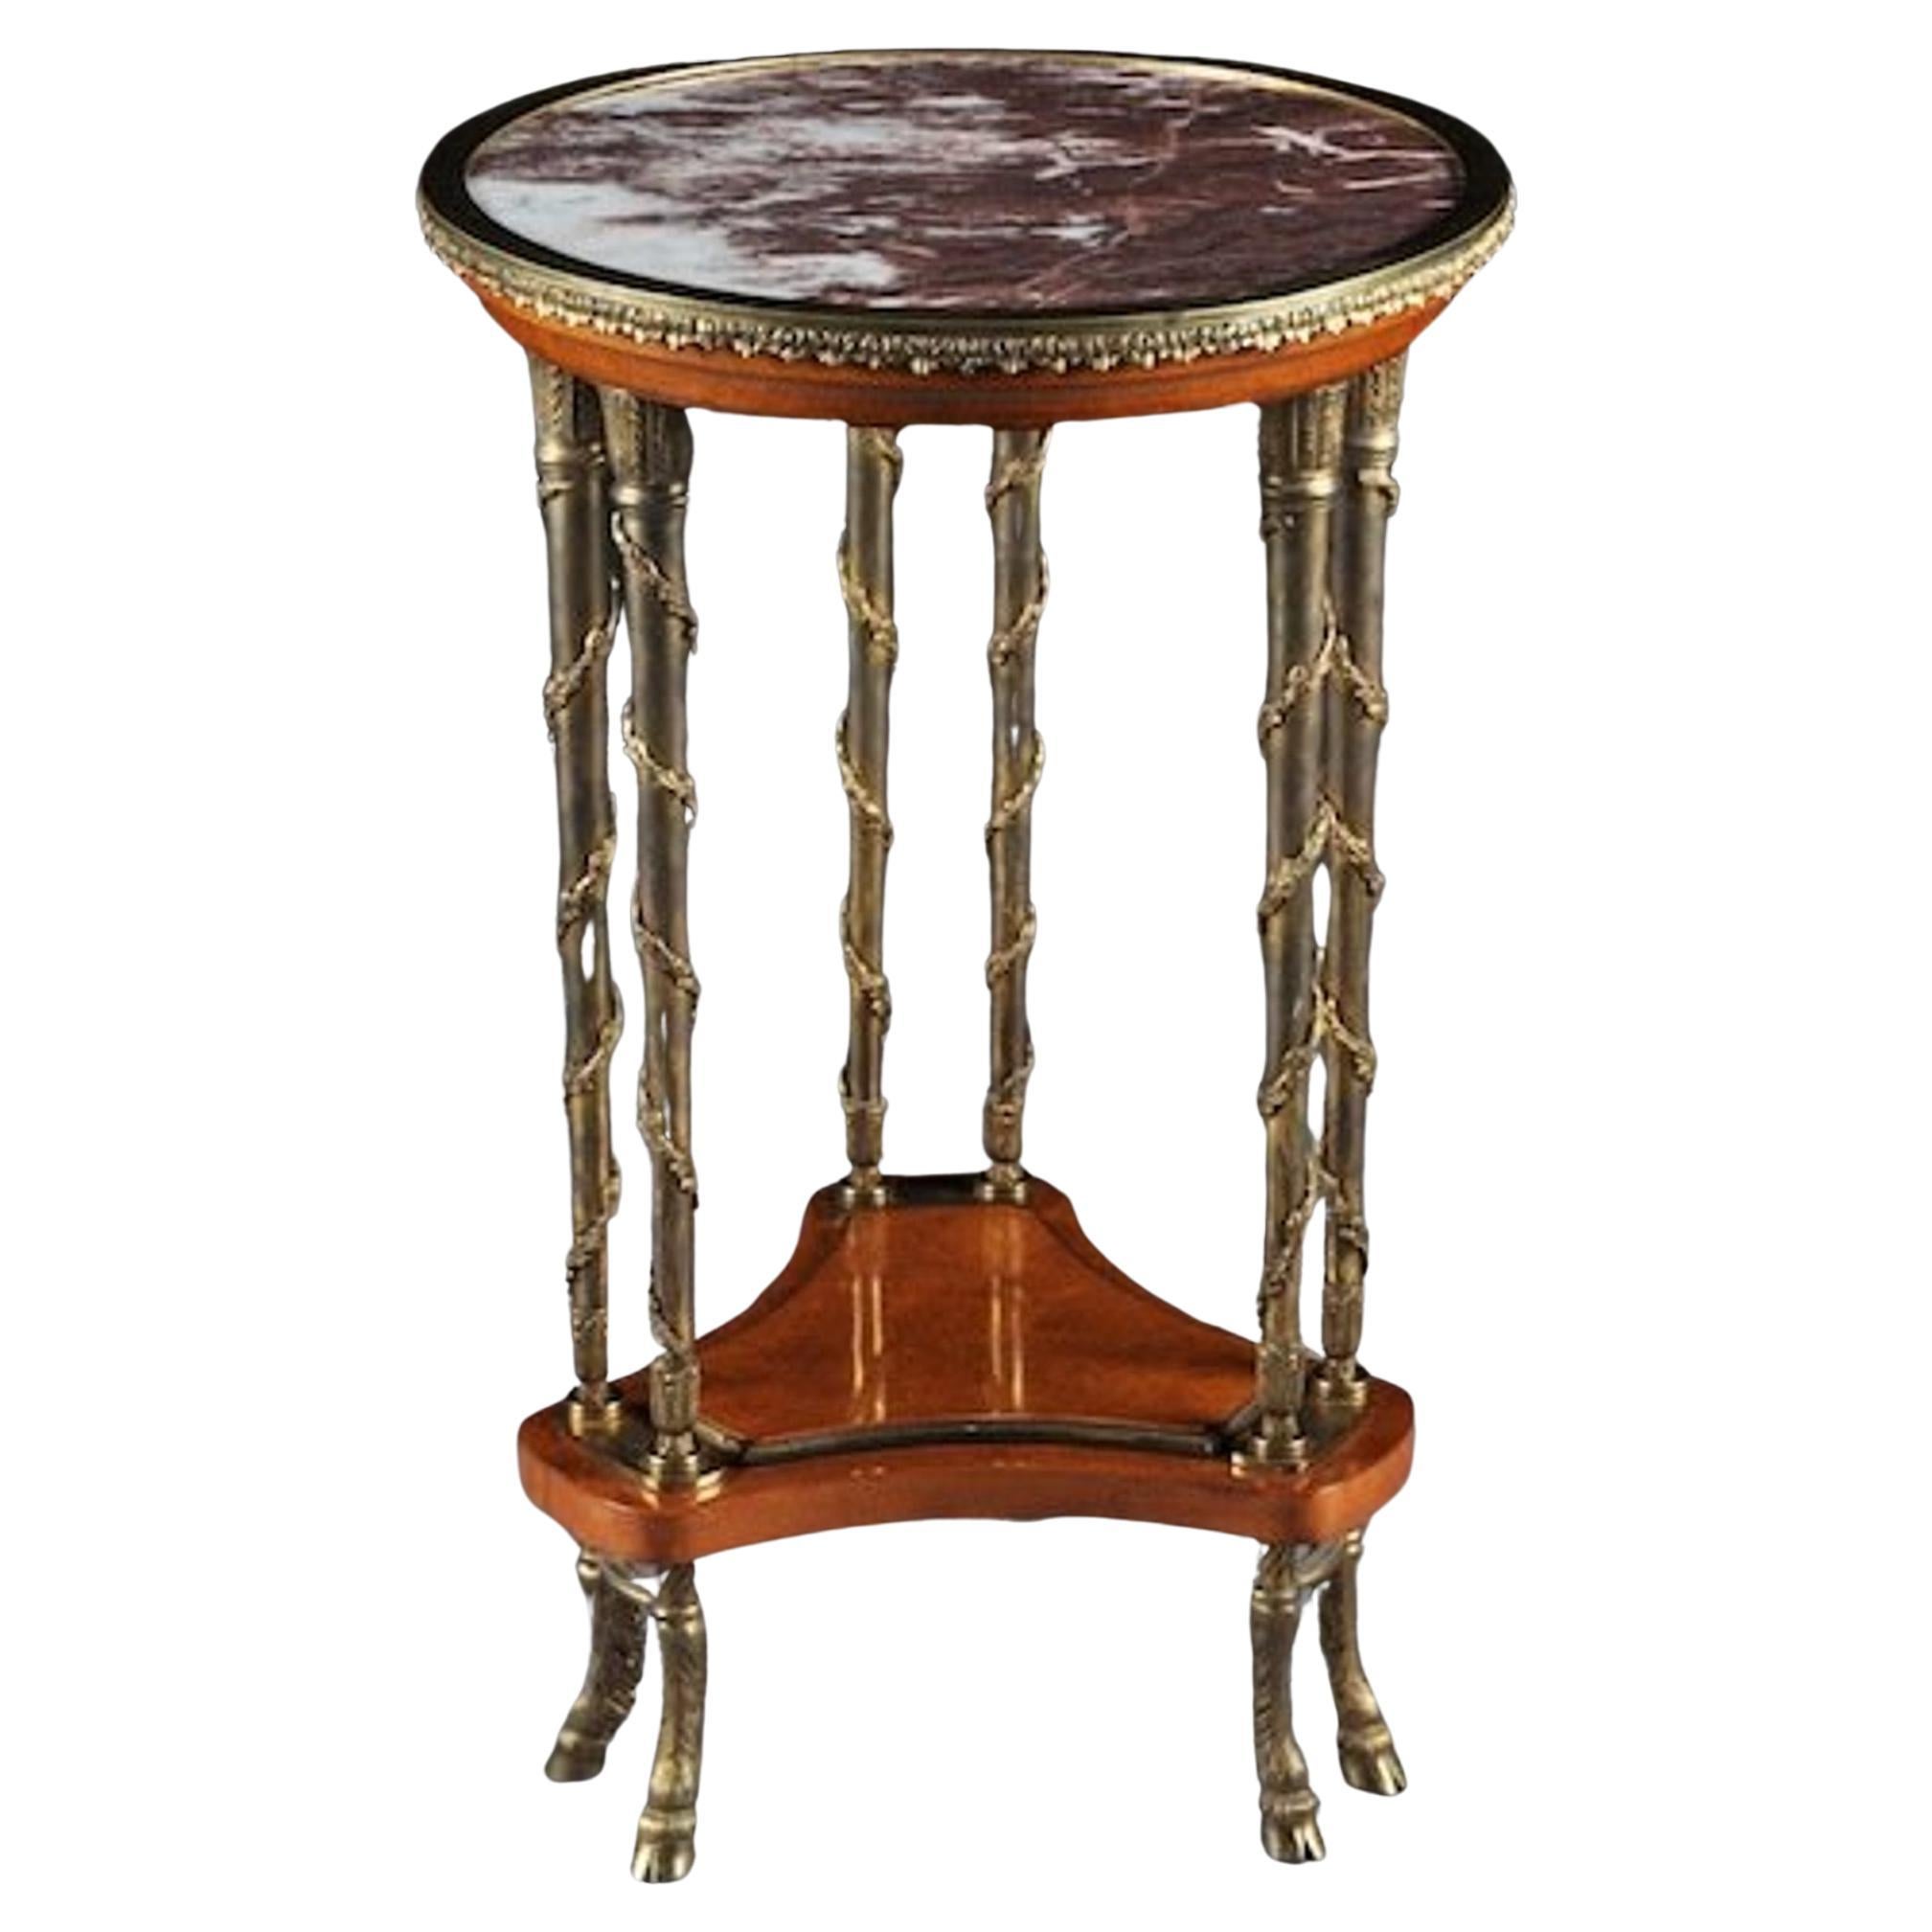 19th Century Louis XVI Style Gilt Bronze Mounted Mahagony Marquetry Side Table For Sale